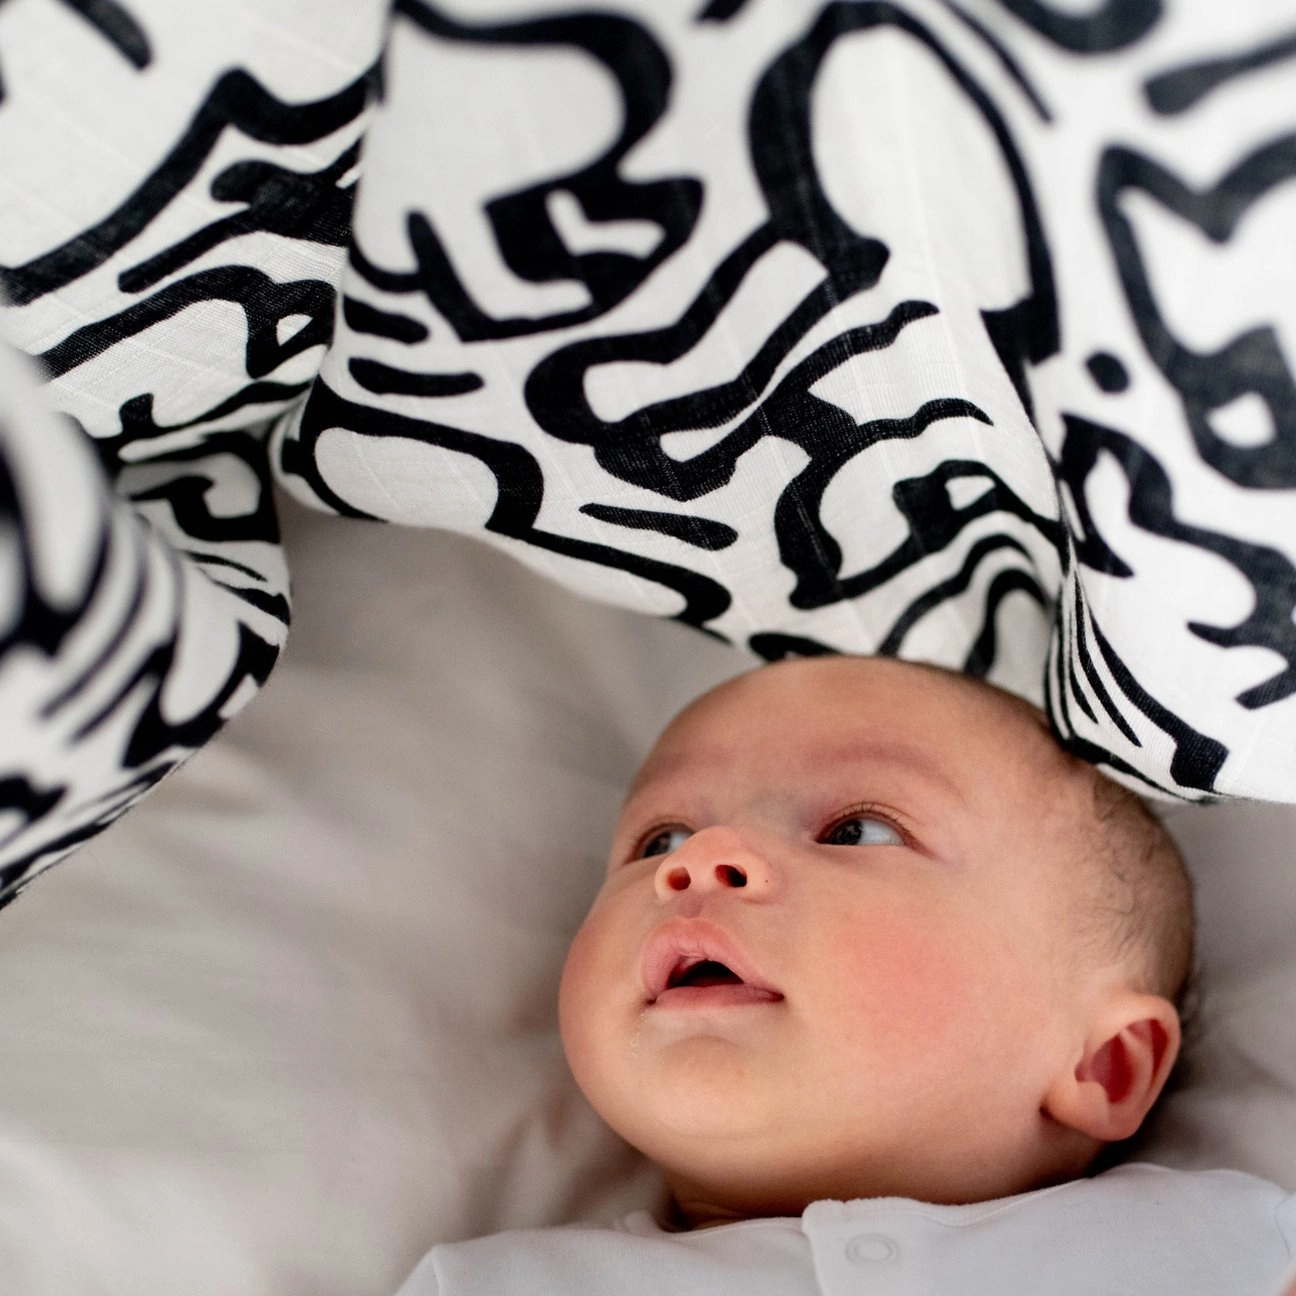 Lifestyle SOUTH HOUS Baby Sensory Muslin blanket XL lovey baby black and white color pattern KEITH HARING NYC